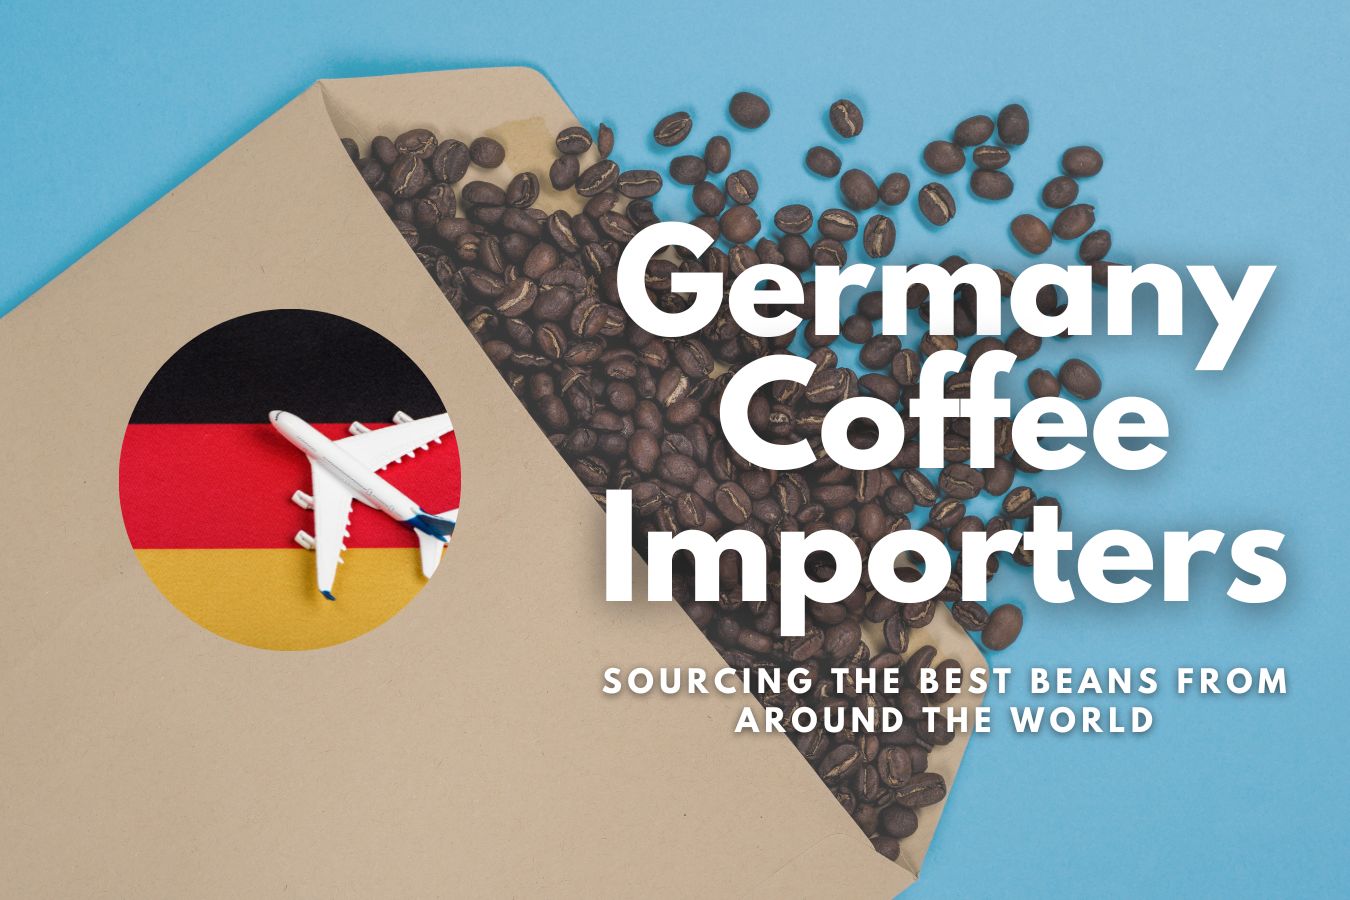 Germany Coffee Importers Sourcing the Best Beans from Around the World